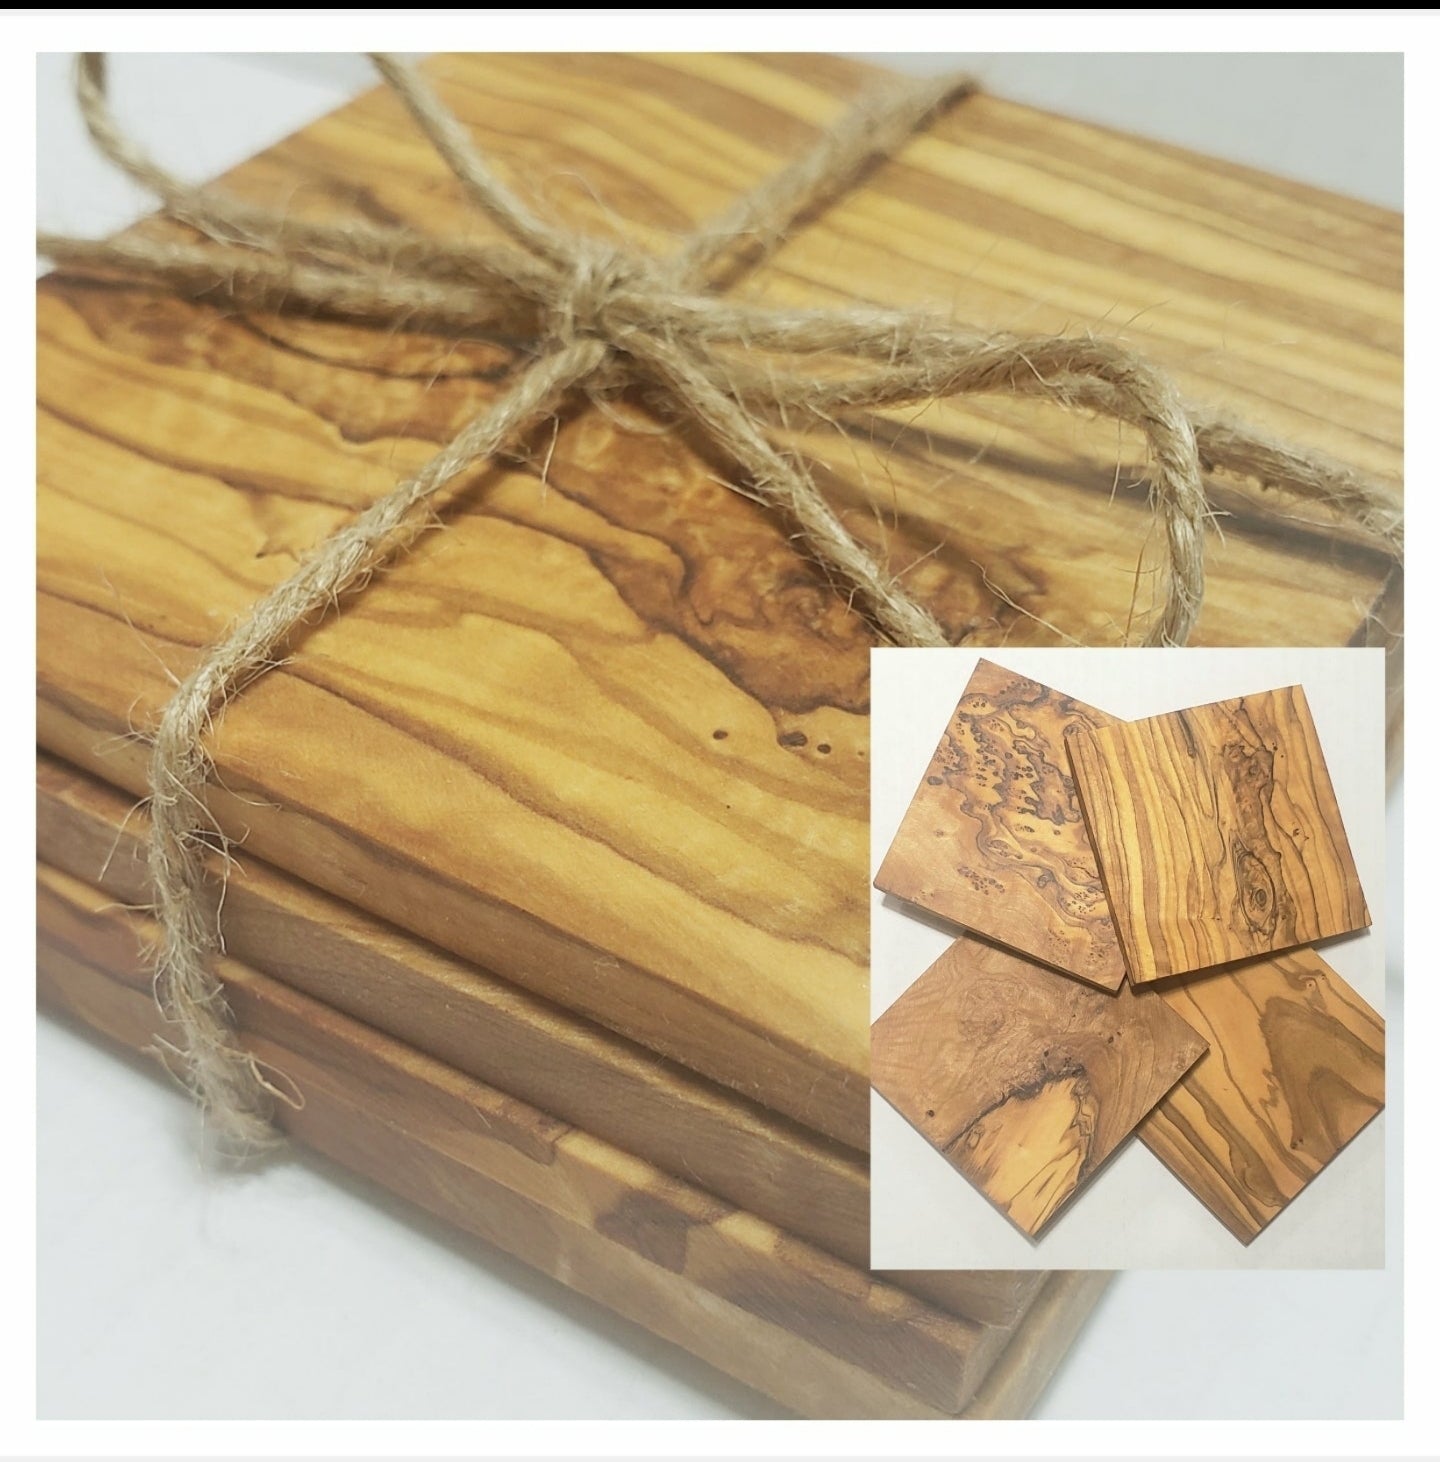 Olive Wood Coasters - Set of 4 Square Wooden Coasters